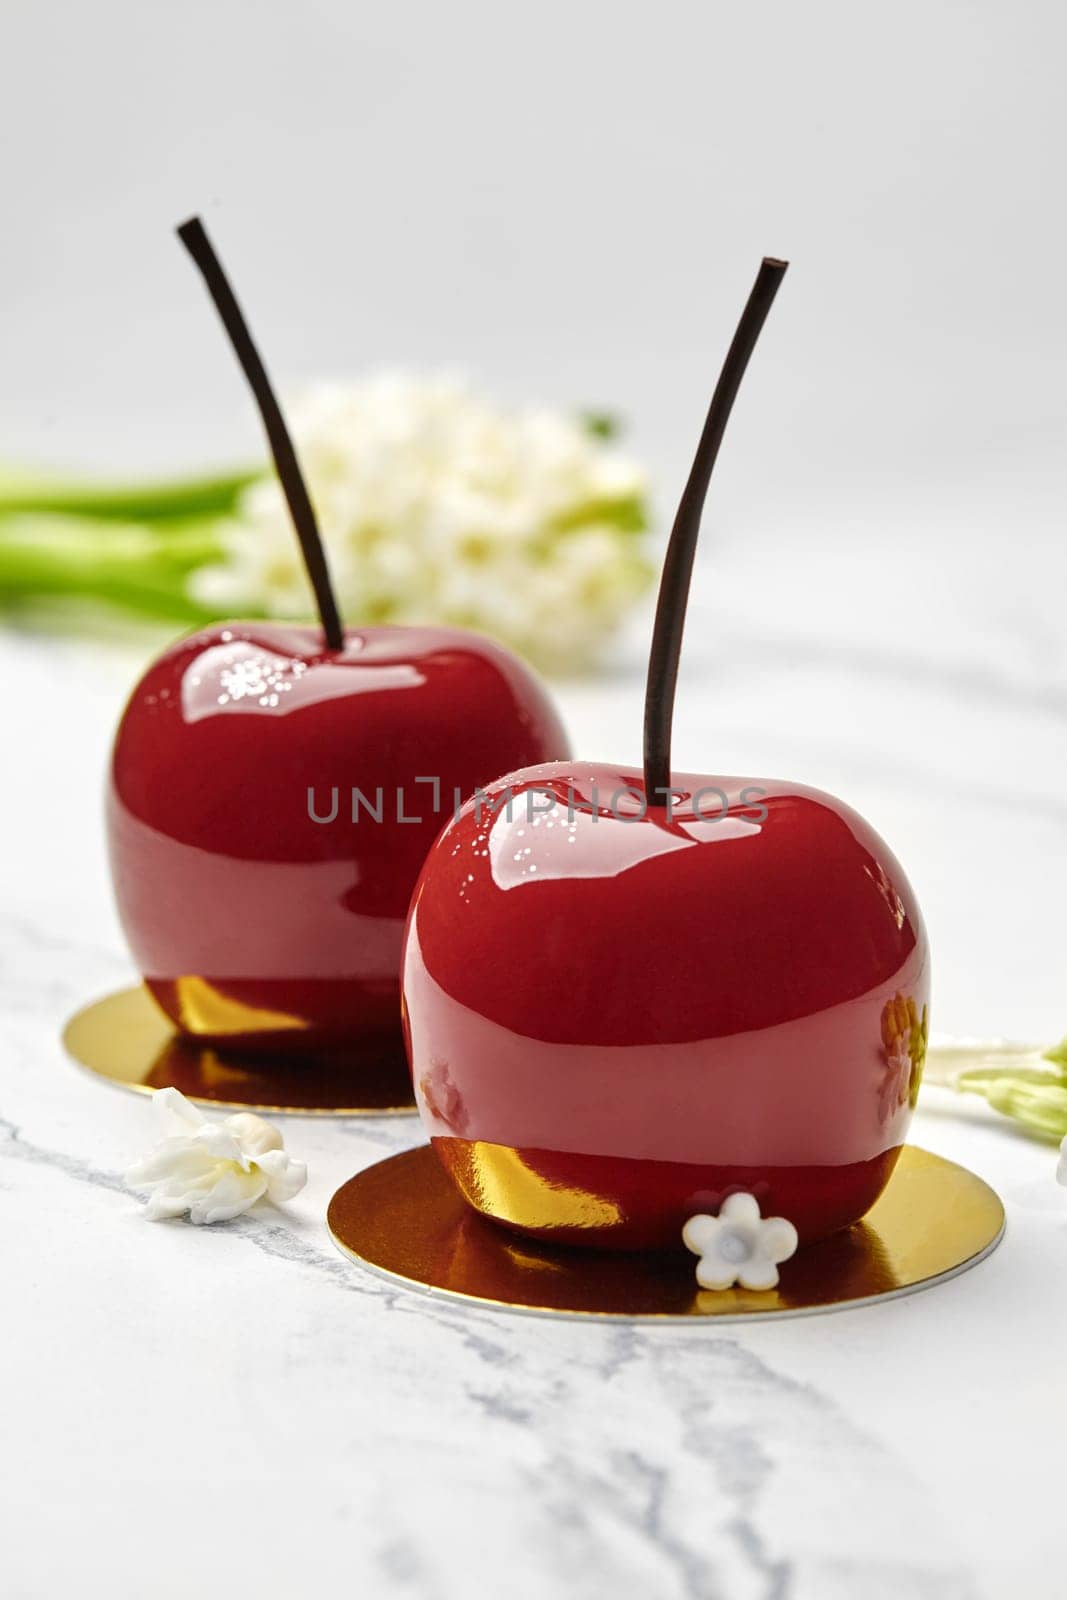 Inspired by beauty of nature, artisan desserts shaped like cherries with glossy red glaze and chocolate stems, presented on marble with gold accents and white flowers in background